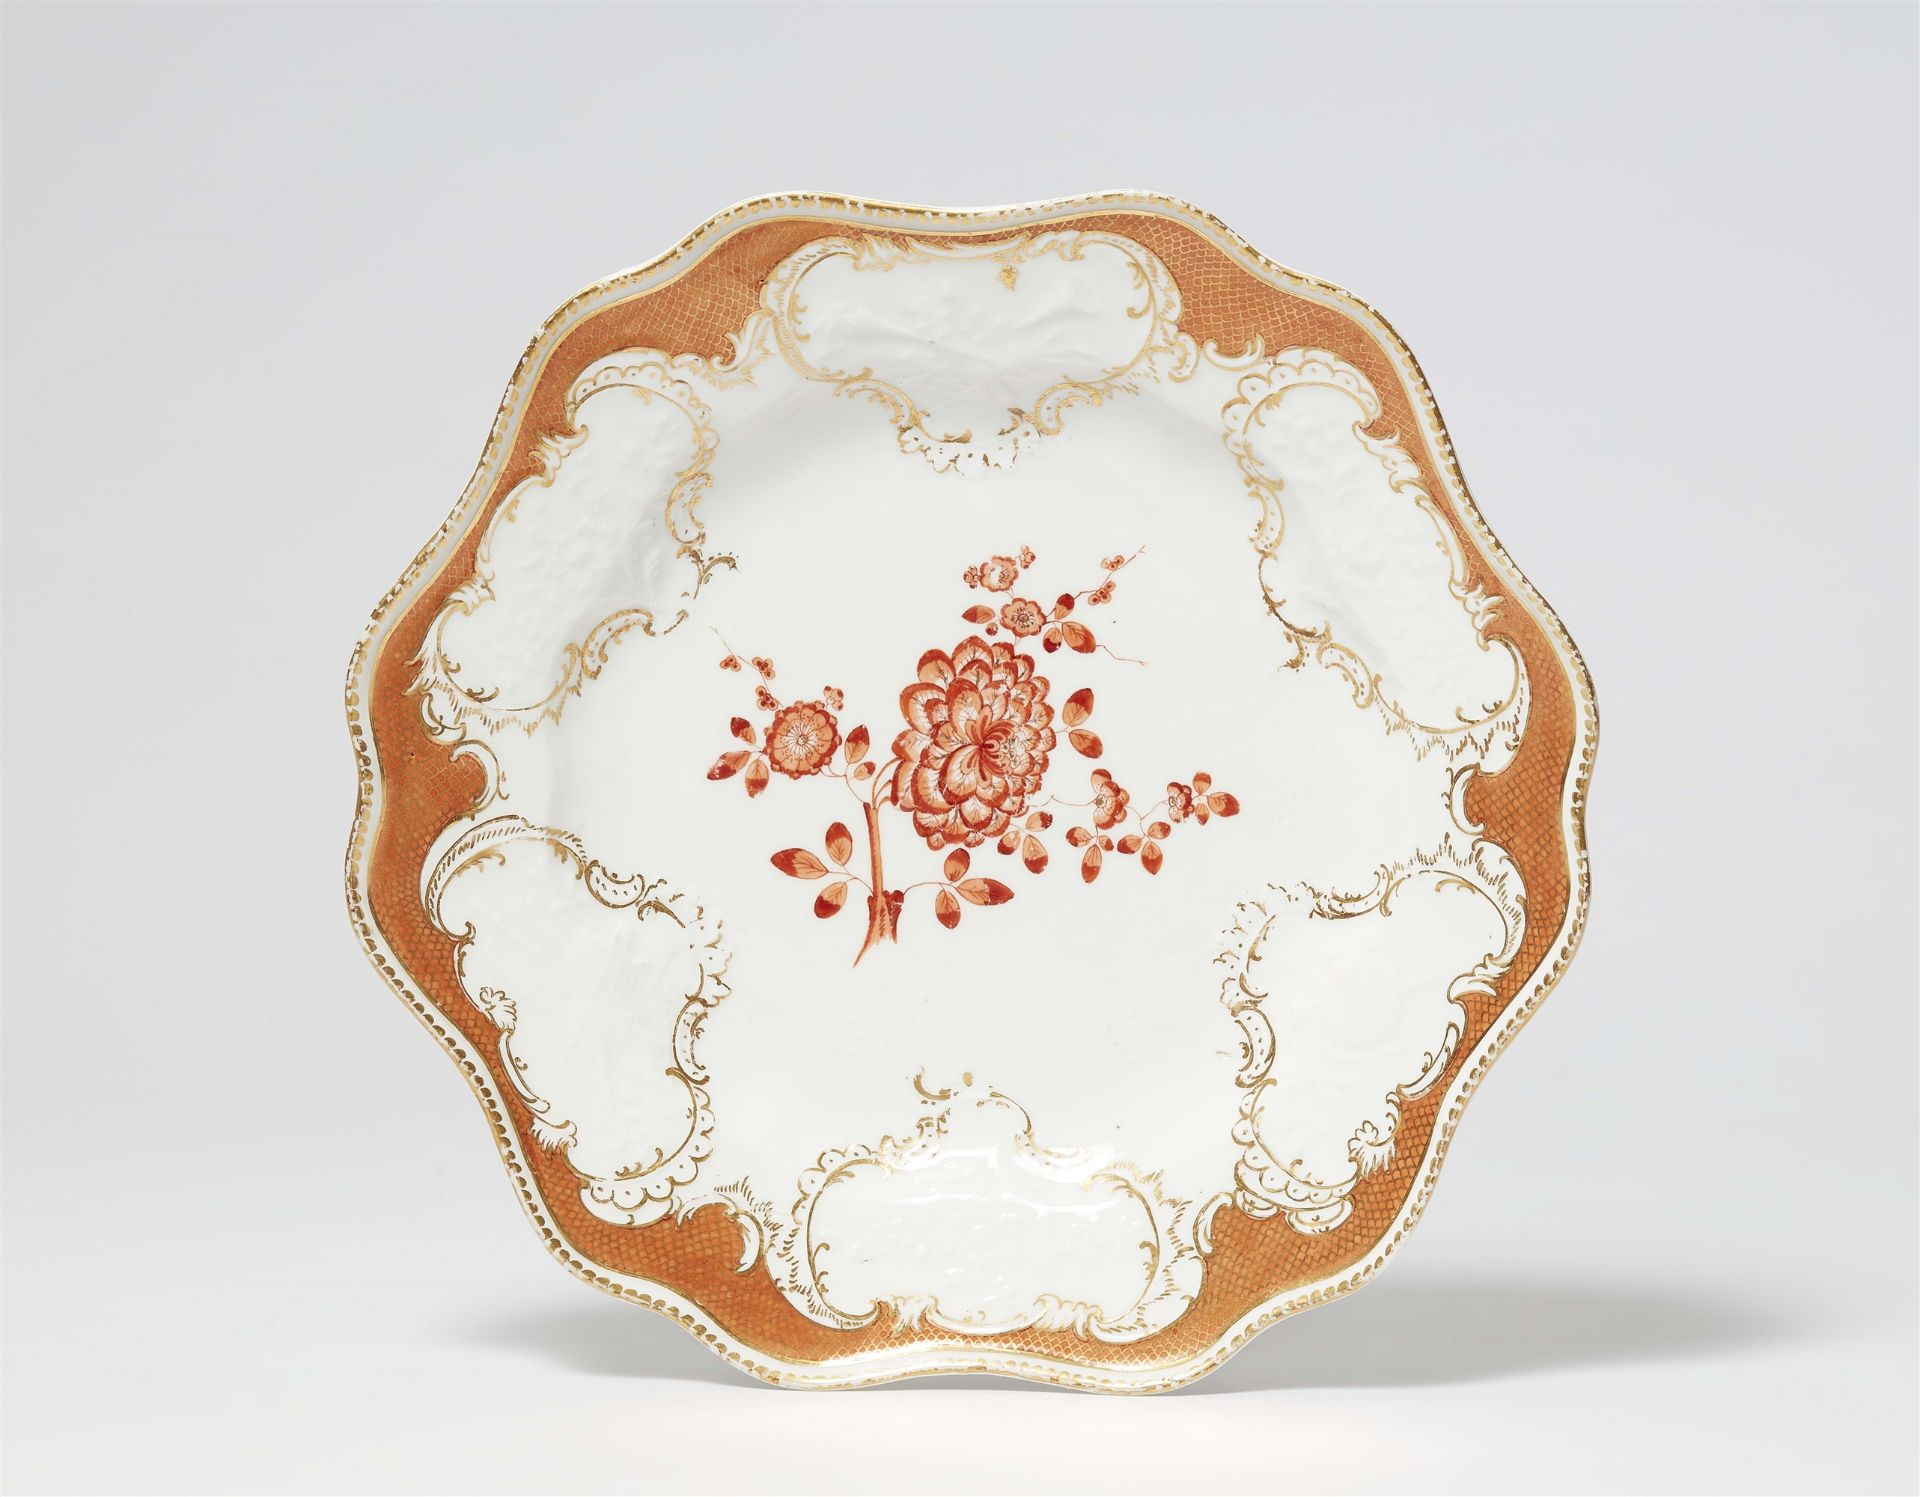 A Meissen porcelain dinner plate from a service with iron red mosaic borders